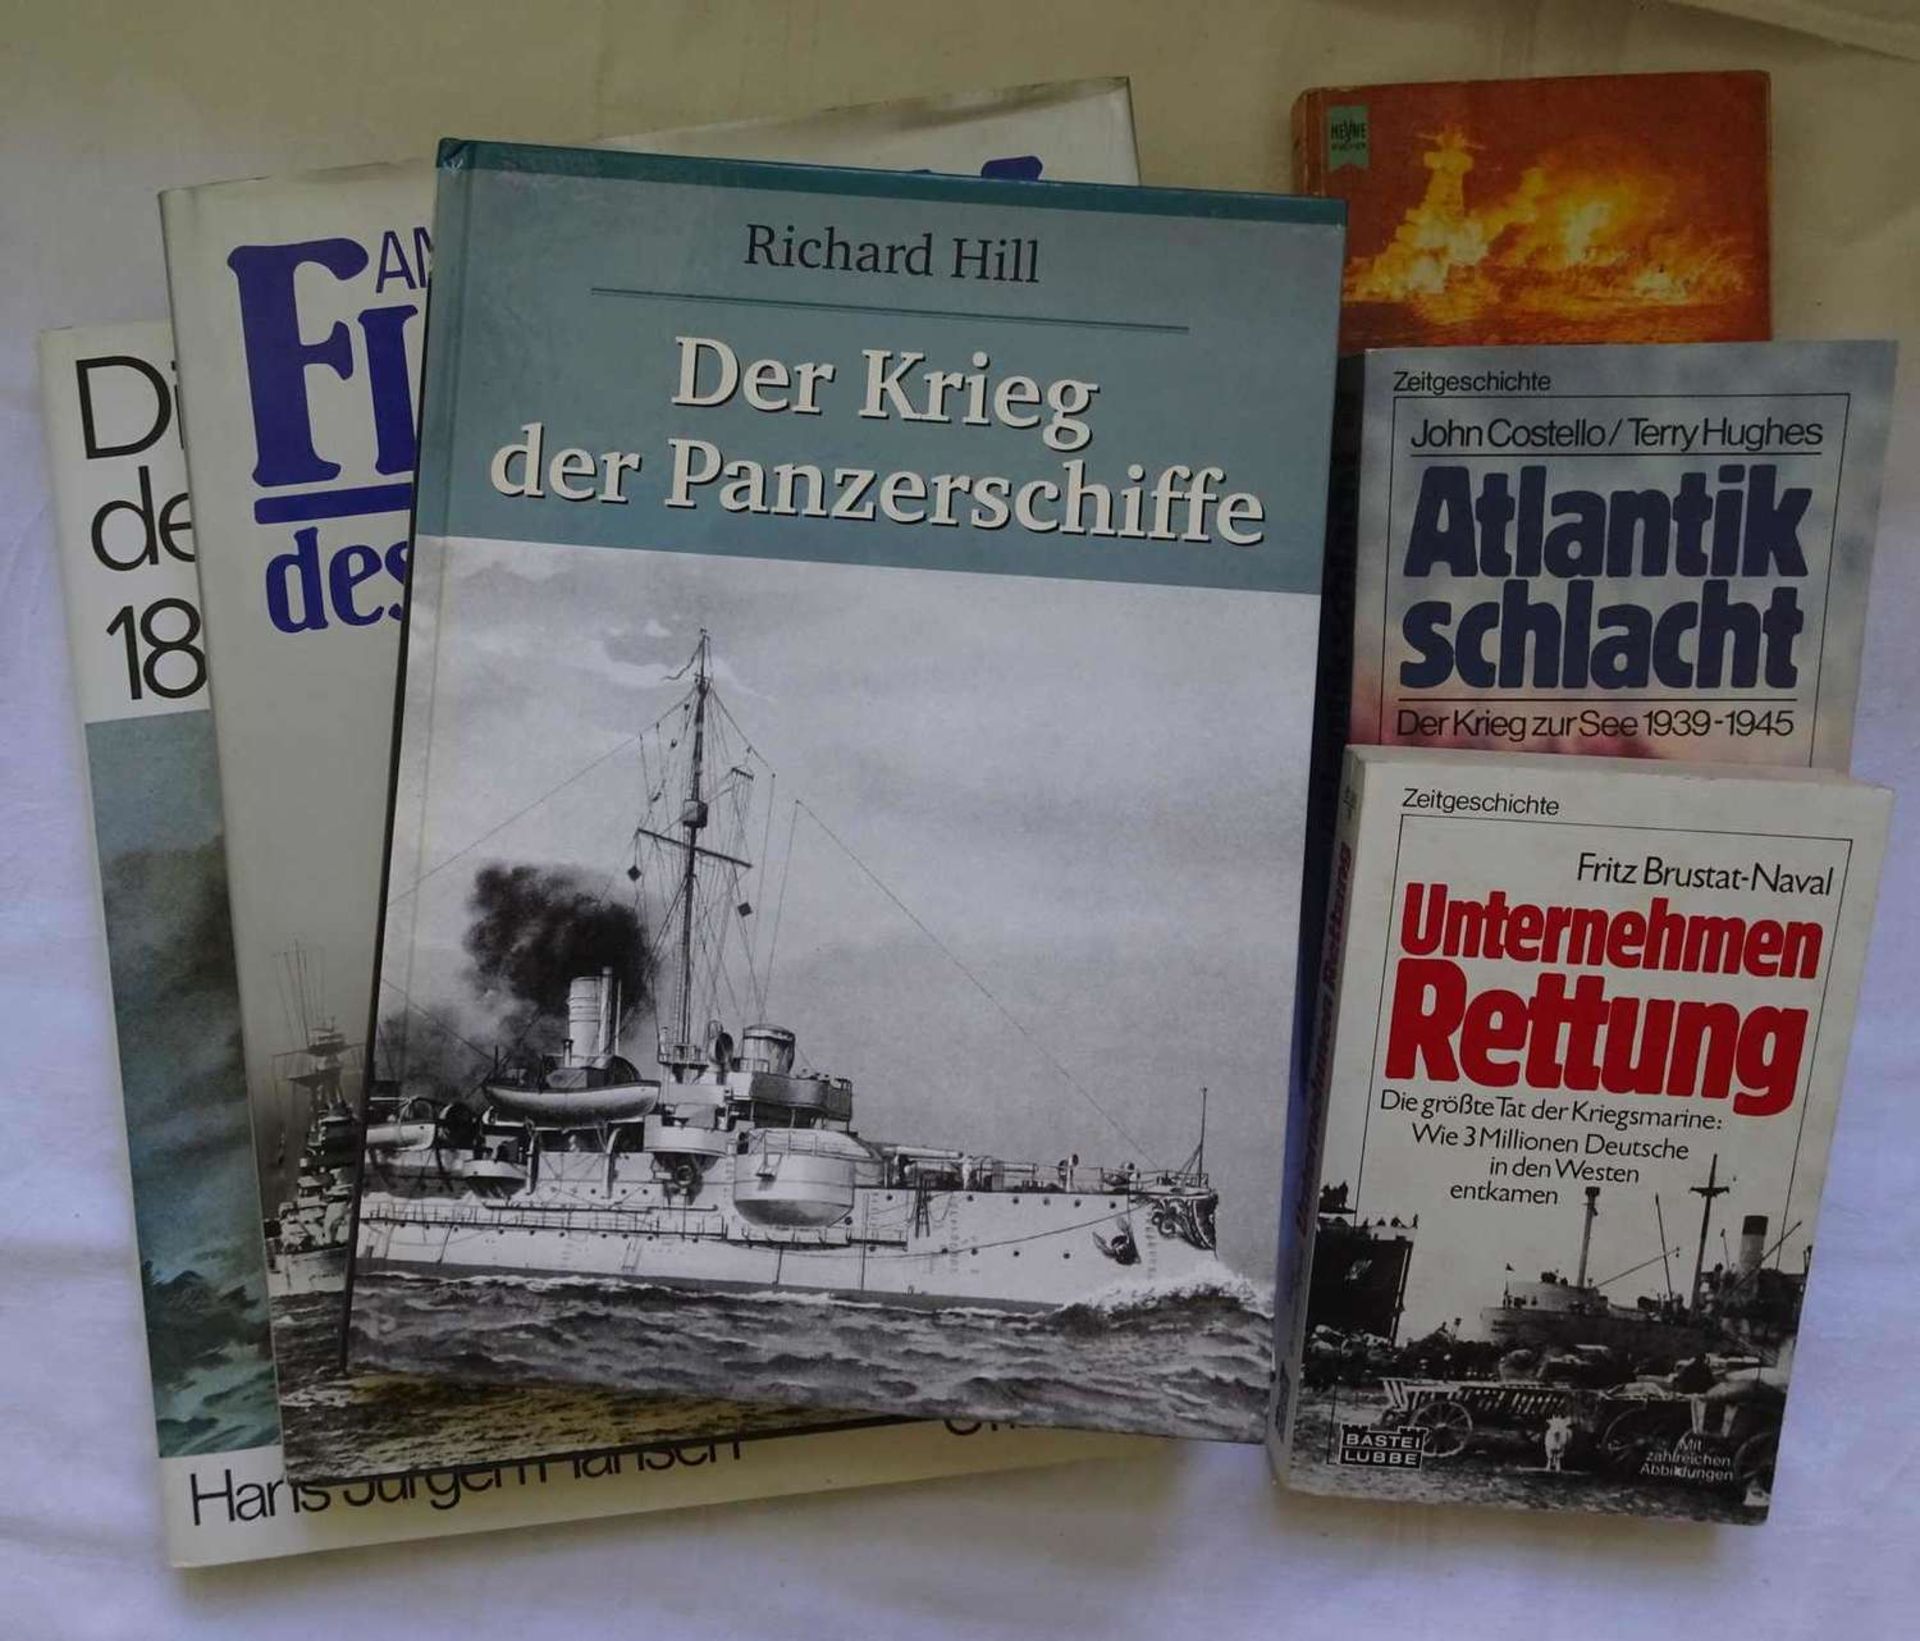 Lot of books 3rd Reich, Navy theme. A total of 6 pieces. Thereby "Atlantic battle", "The war of